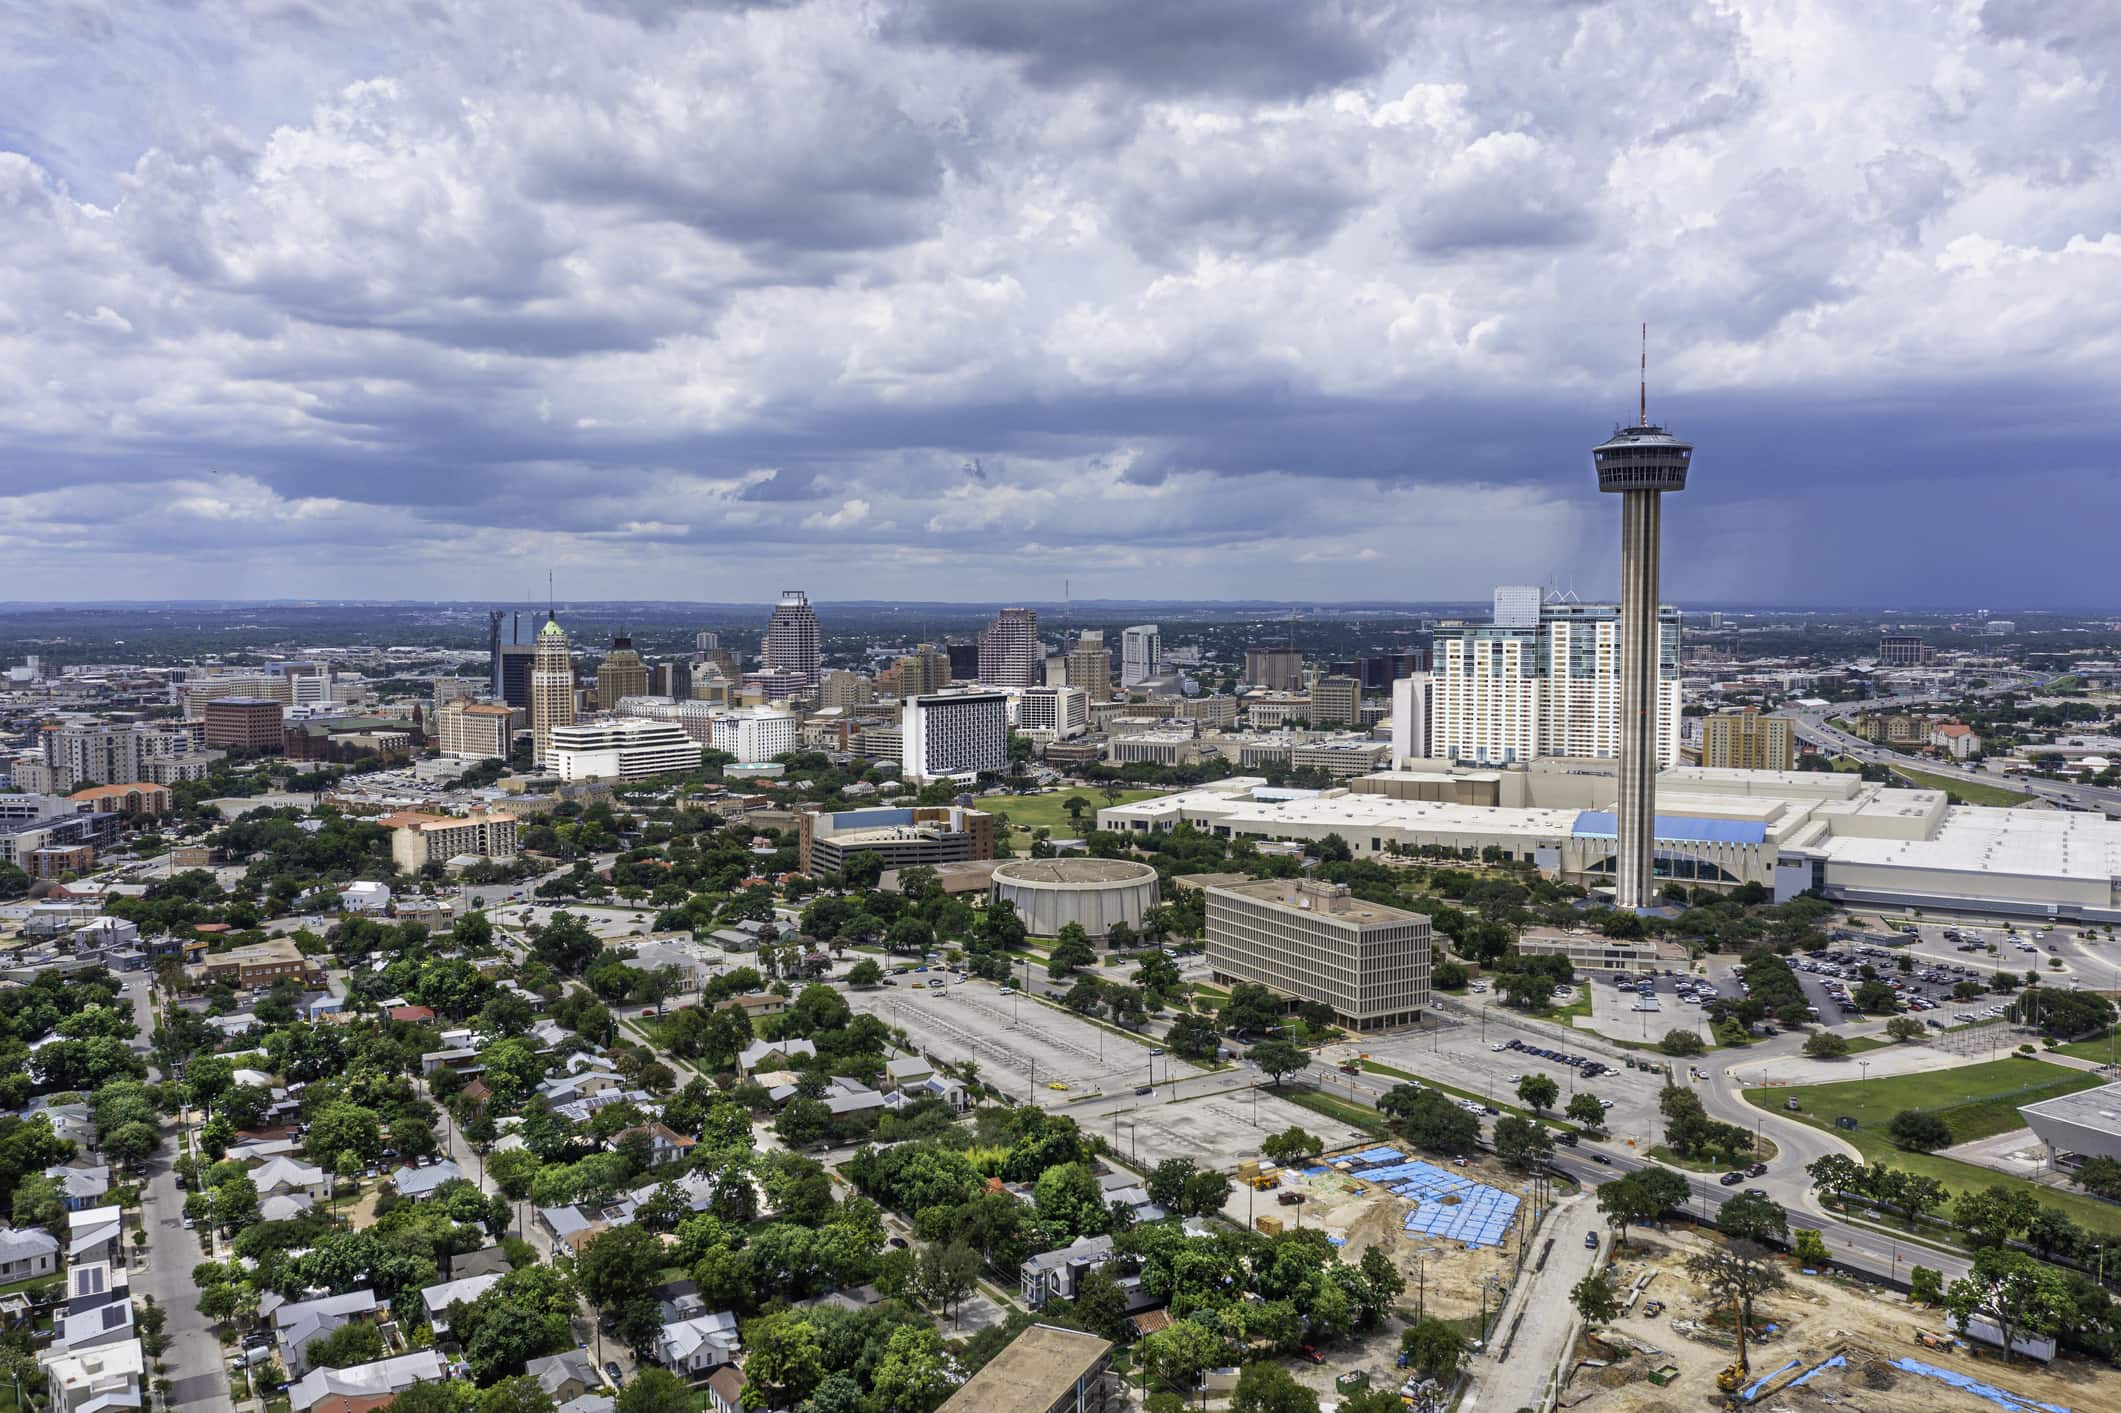 Drone angle view of San Antonio with afternoon thunderstorm